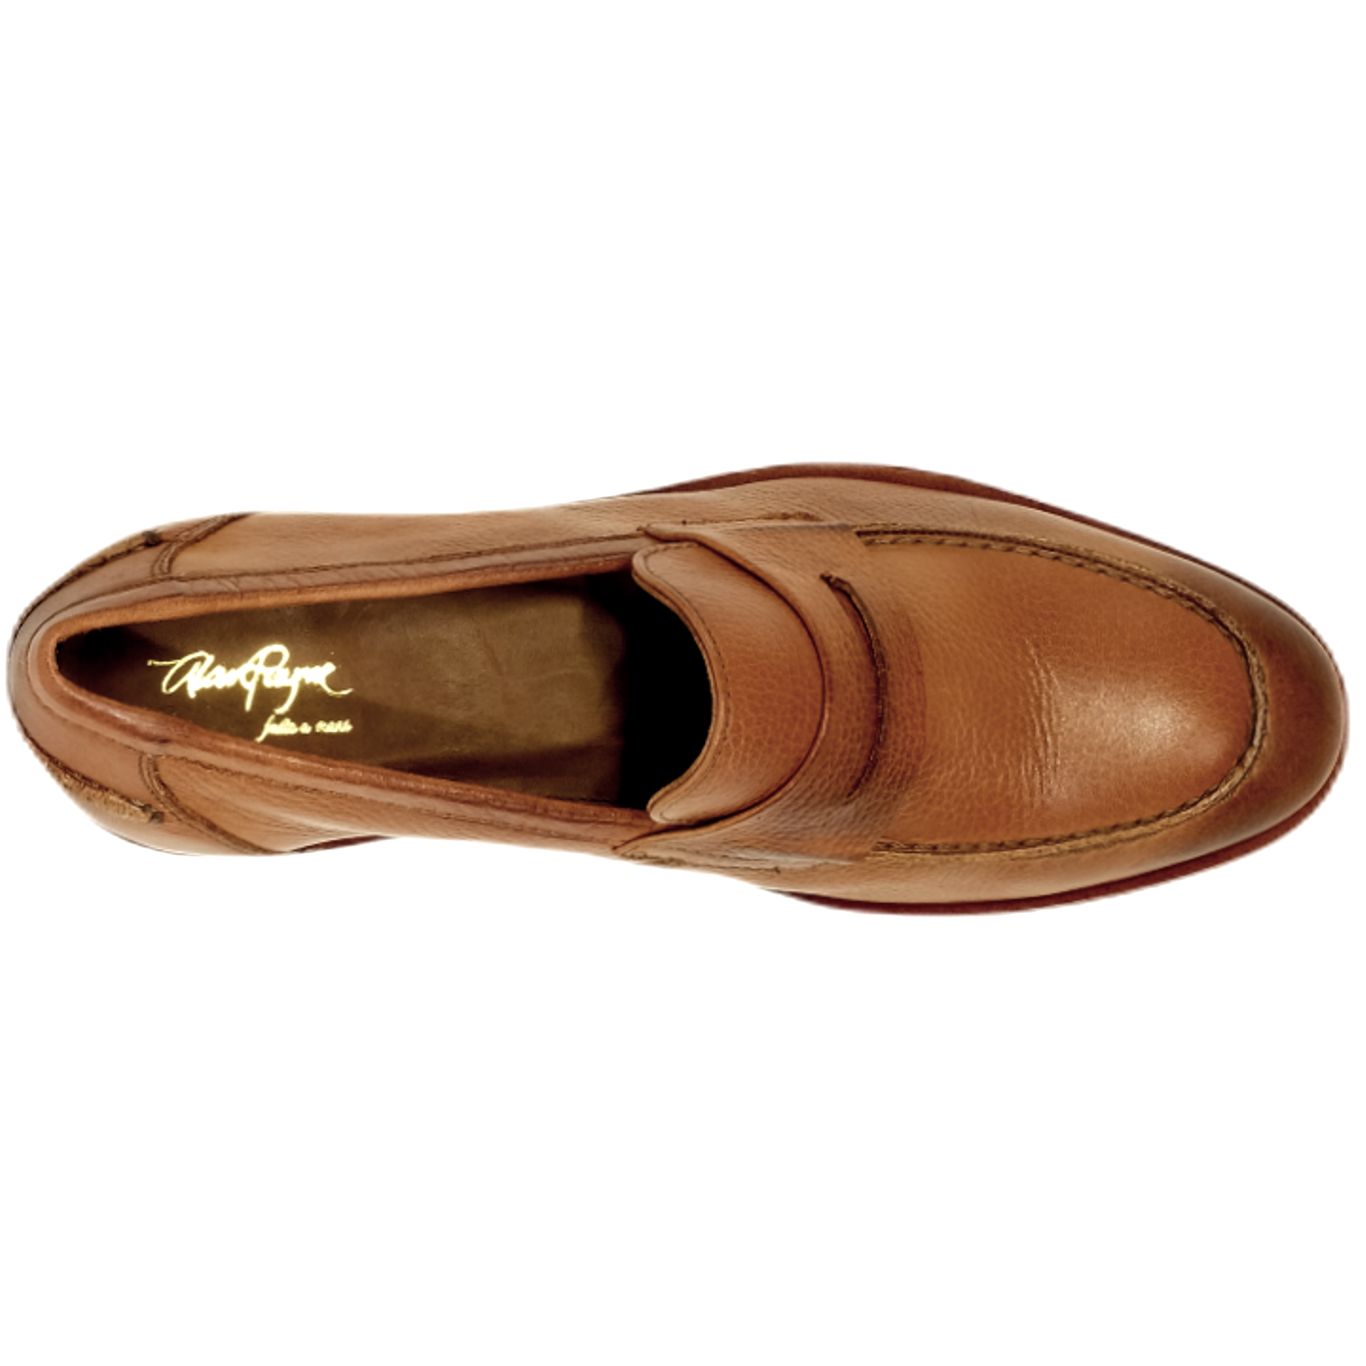 Naples Tumbled Leather Modern Penny Slip-On in Mahogany by Alan Payne Footwear